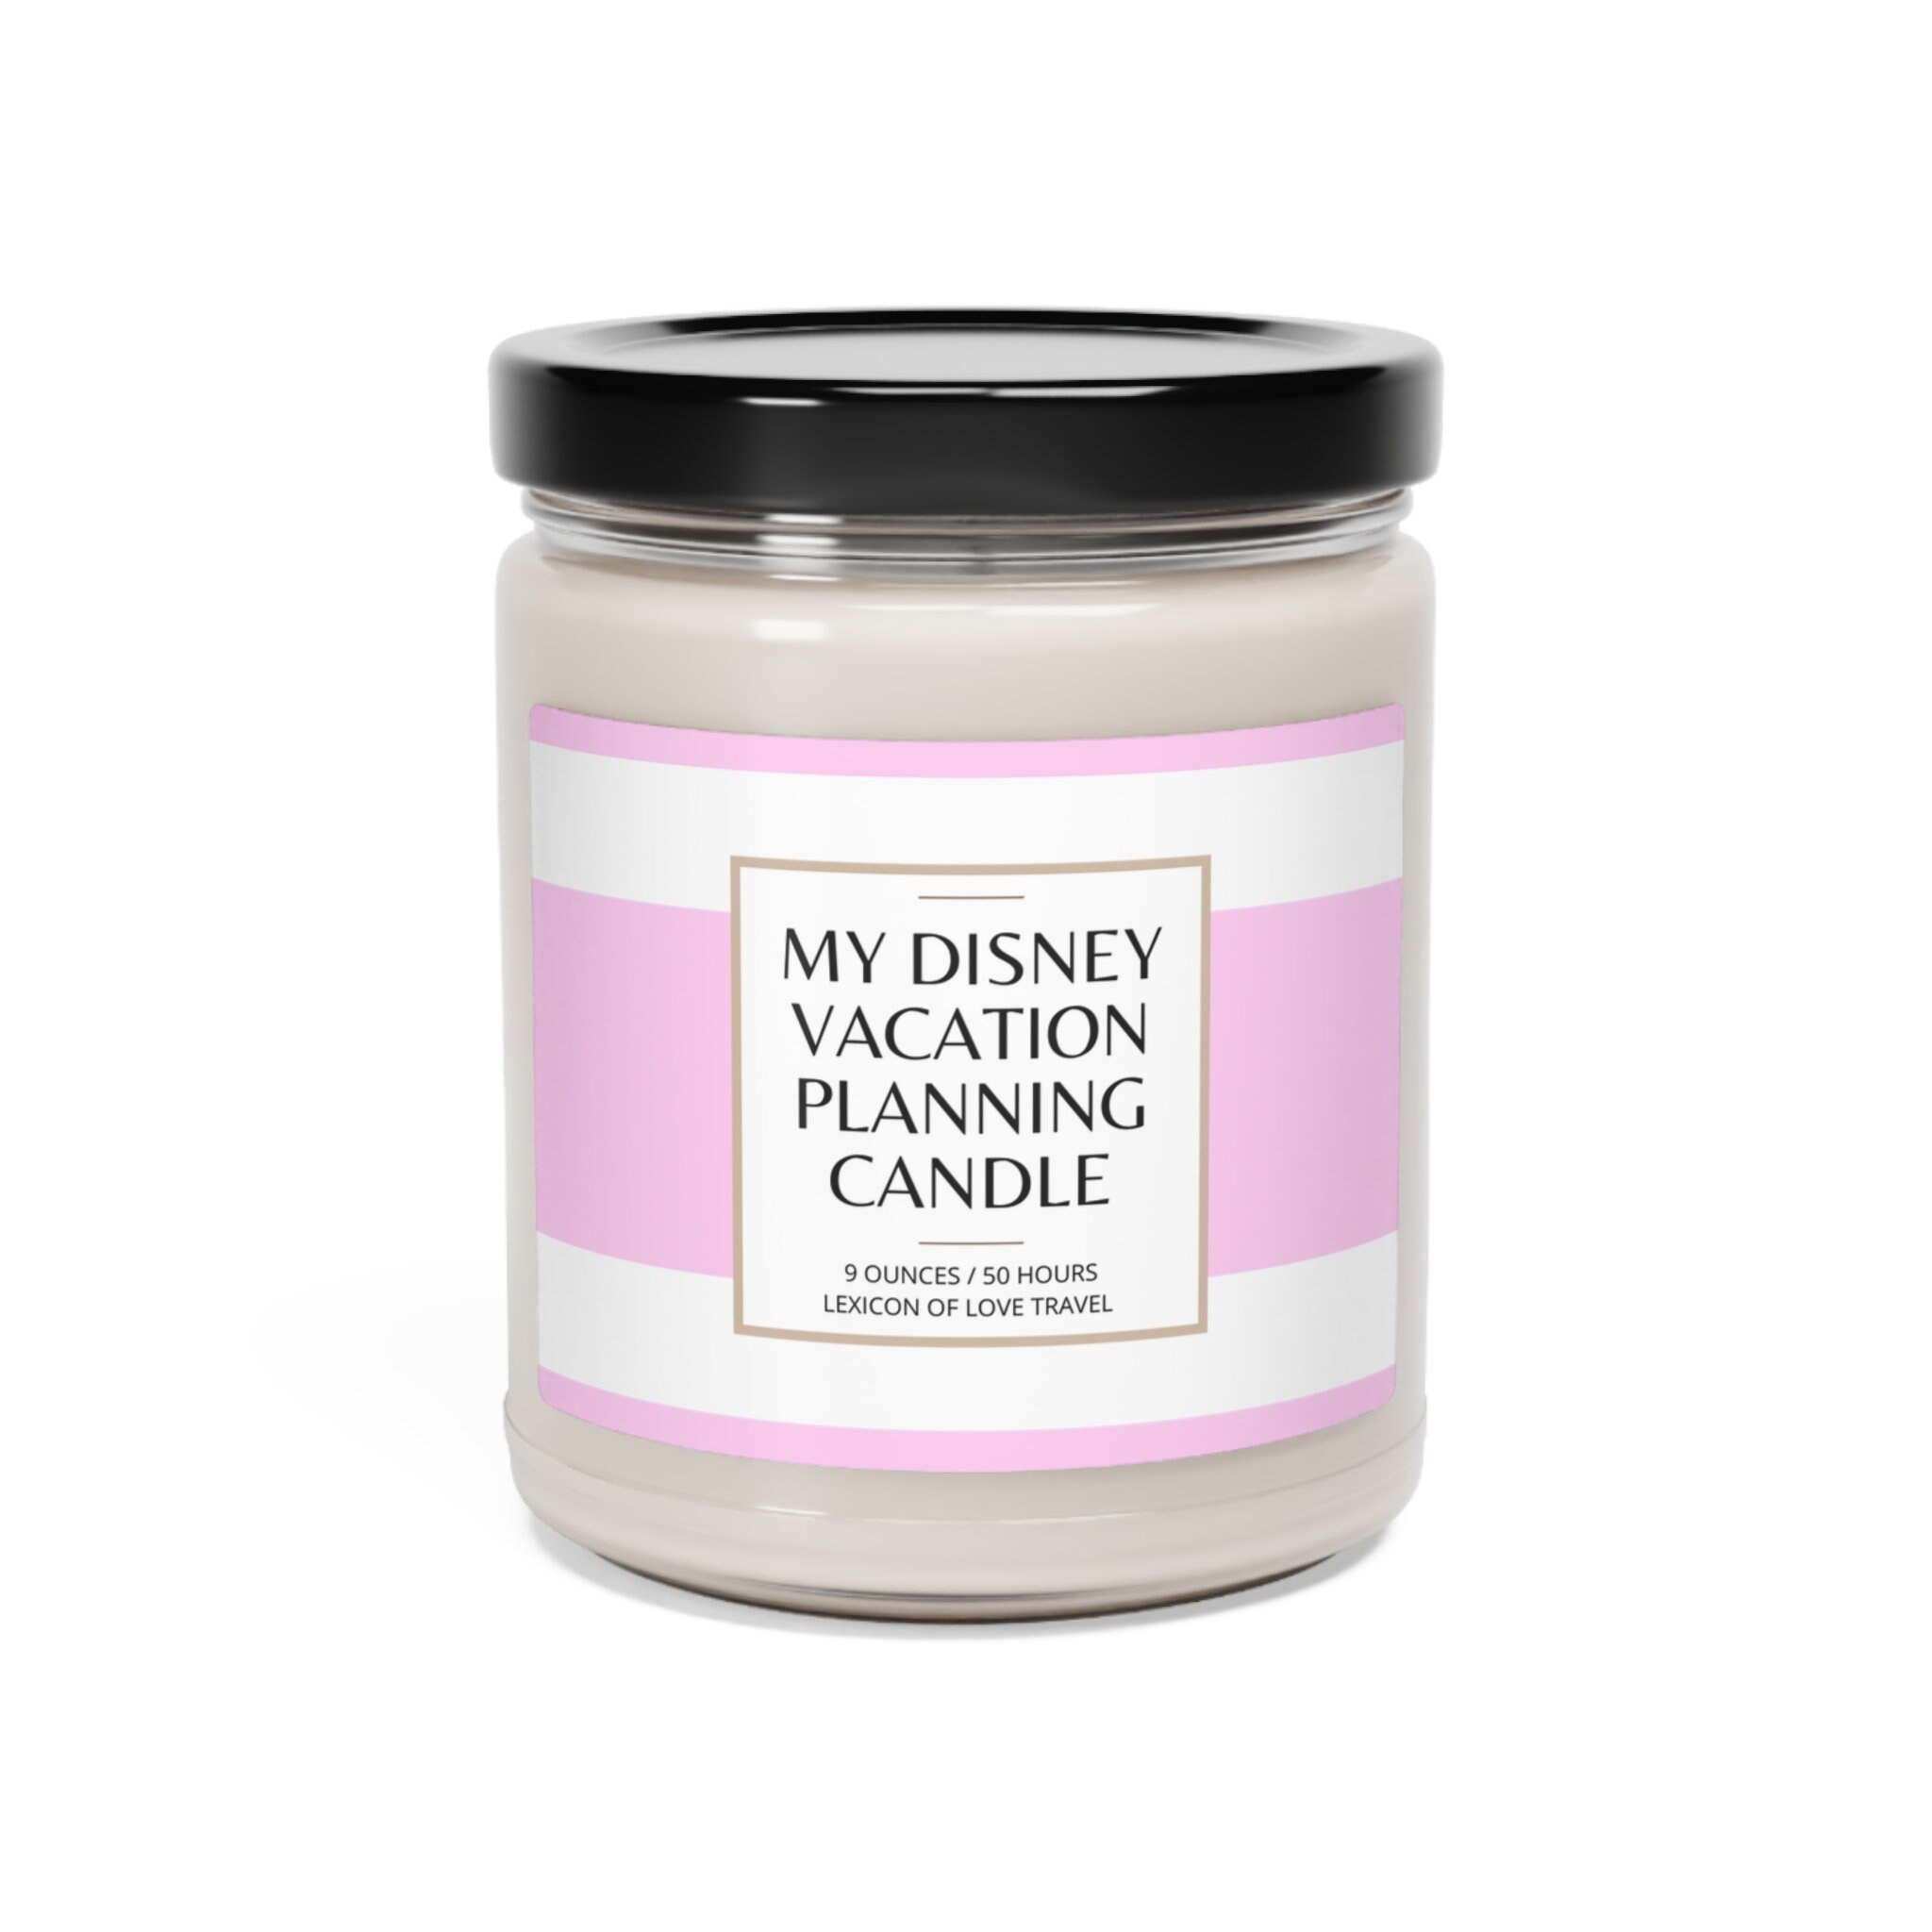 These smells >>> #parkscents #themeparkscents #disneyscents #disneyroo